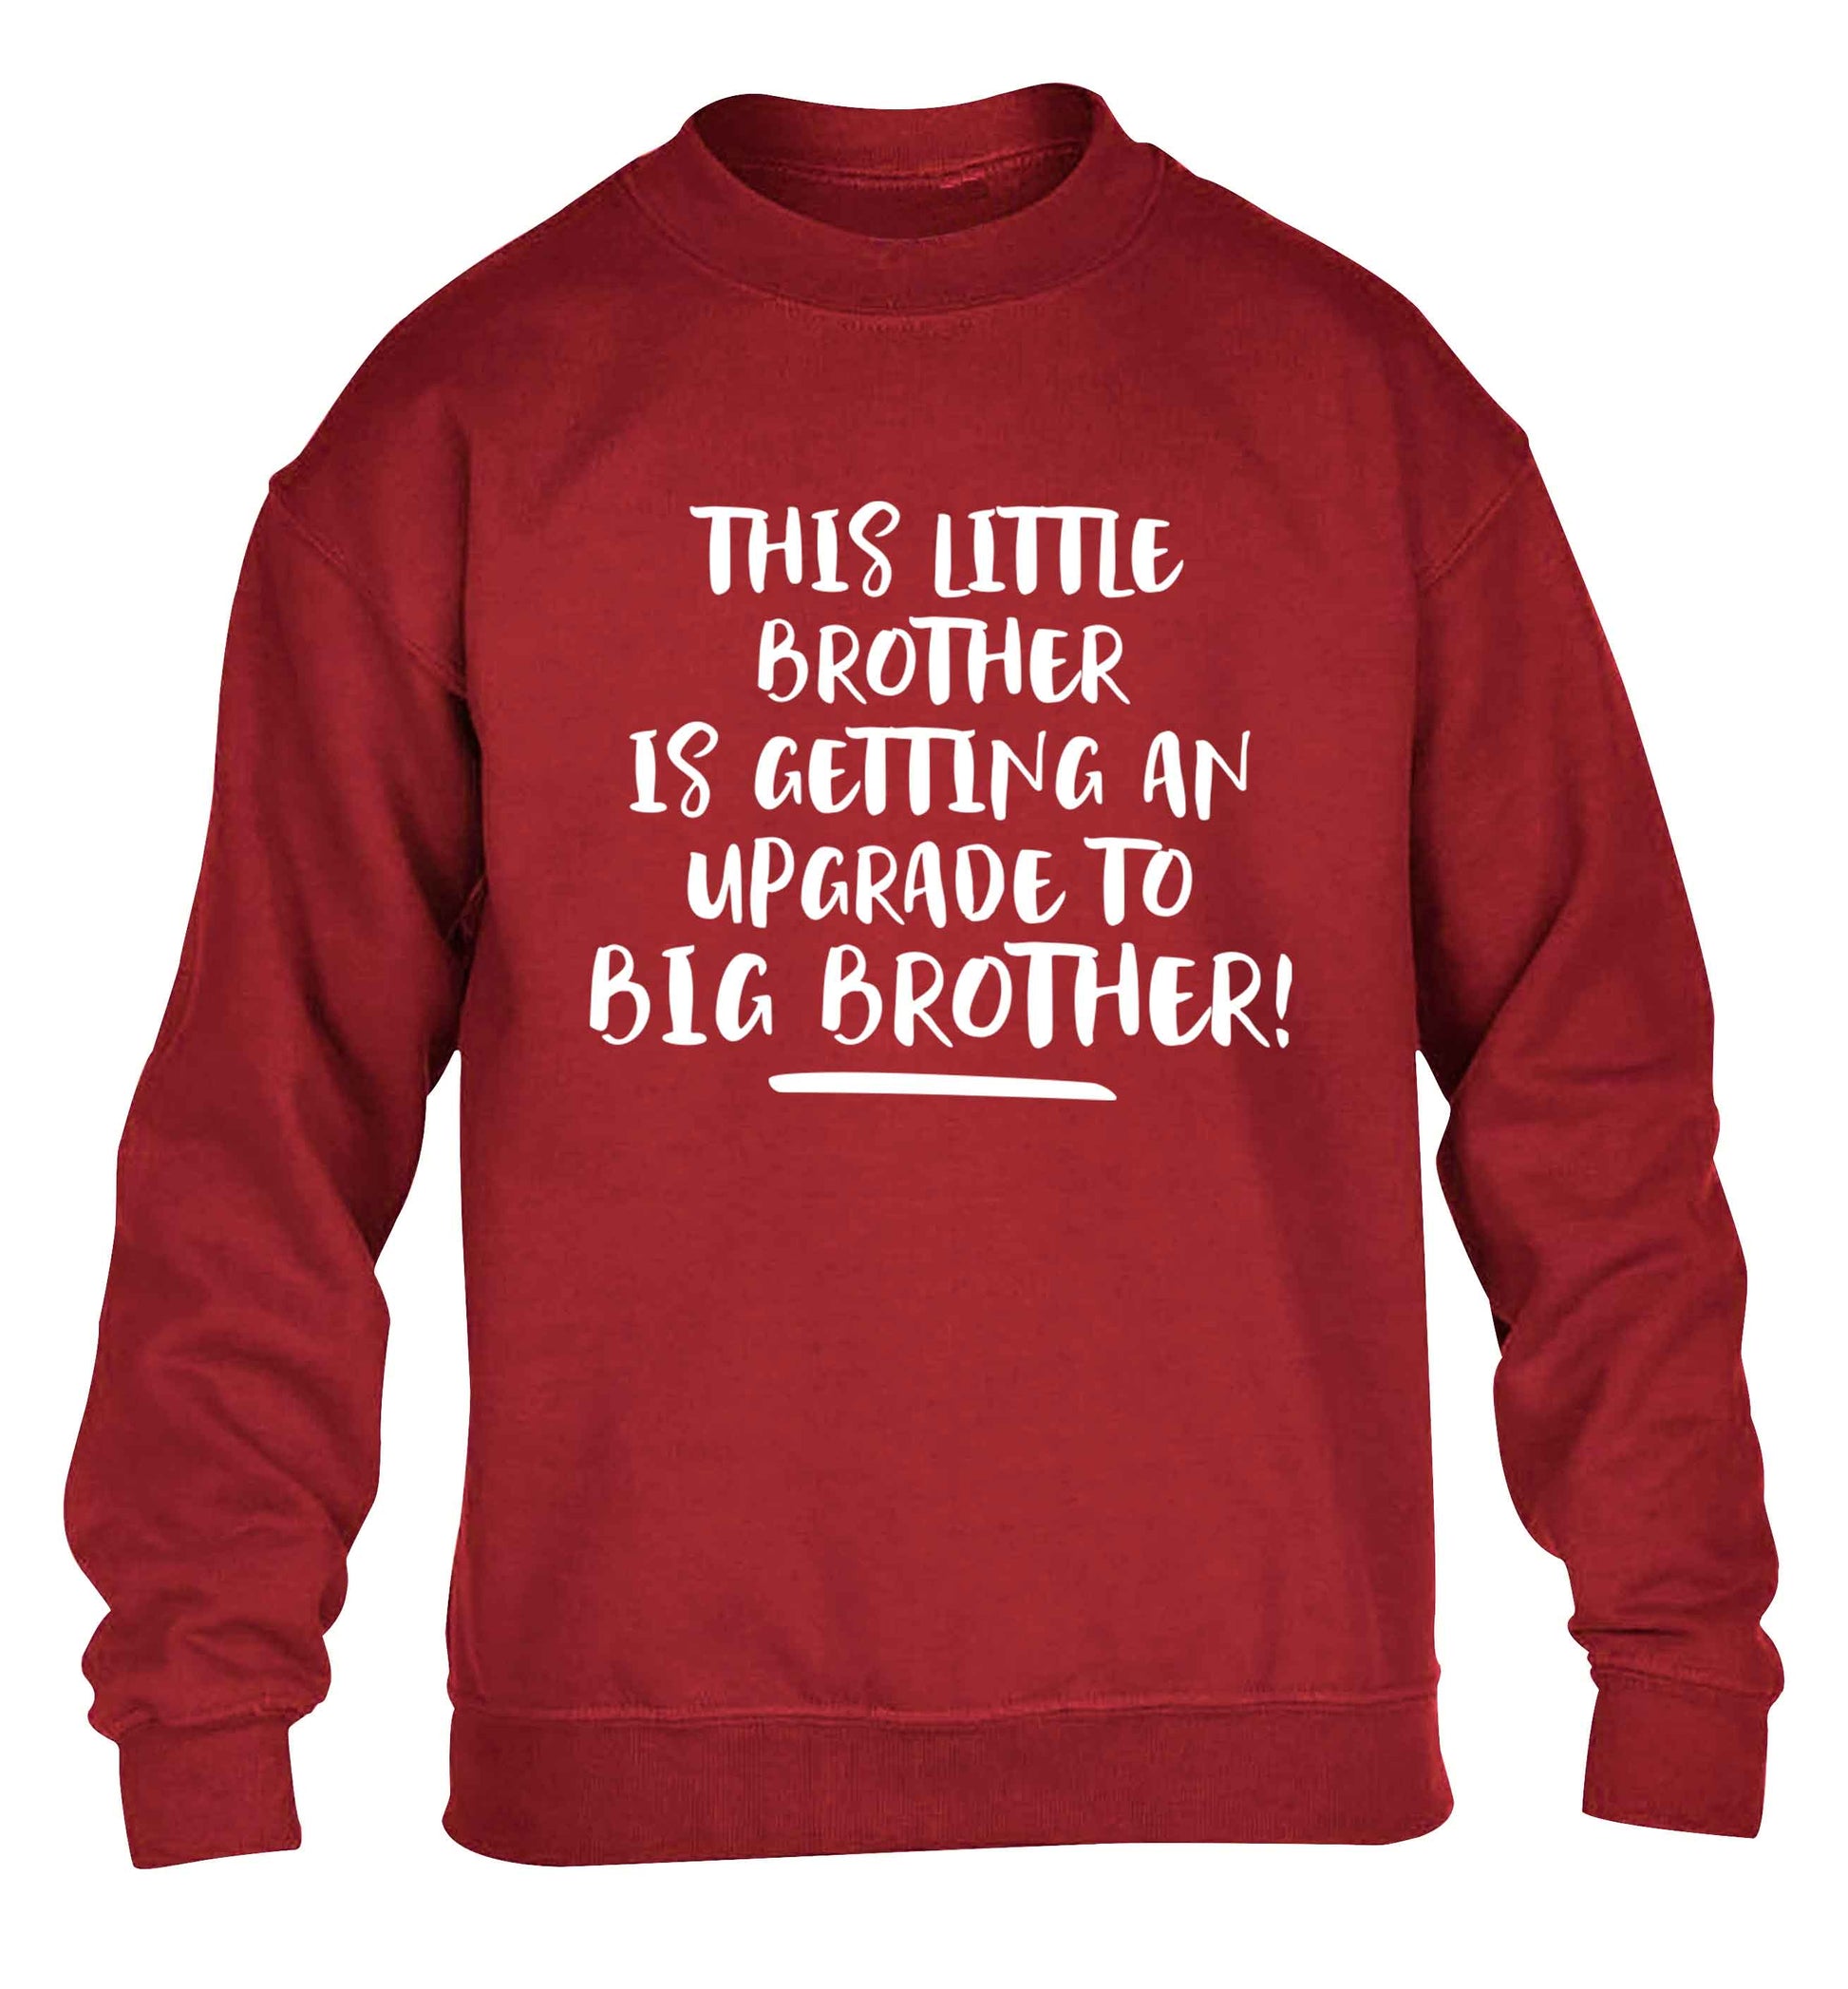 This little brother is getting an upgrade to big brother! children's grey sweater 12-13 Years